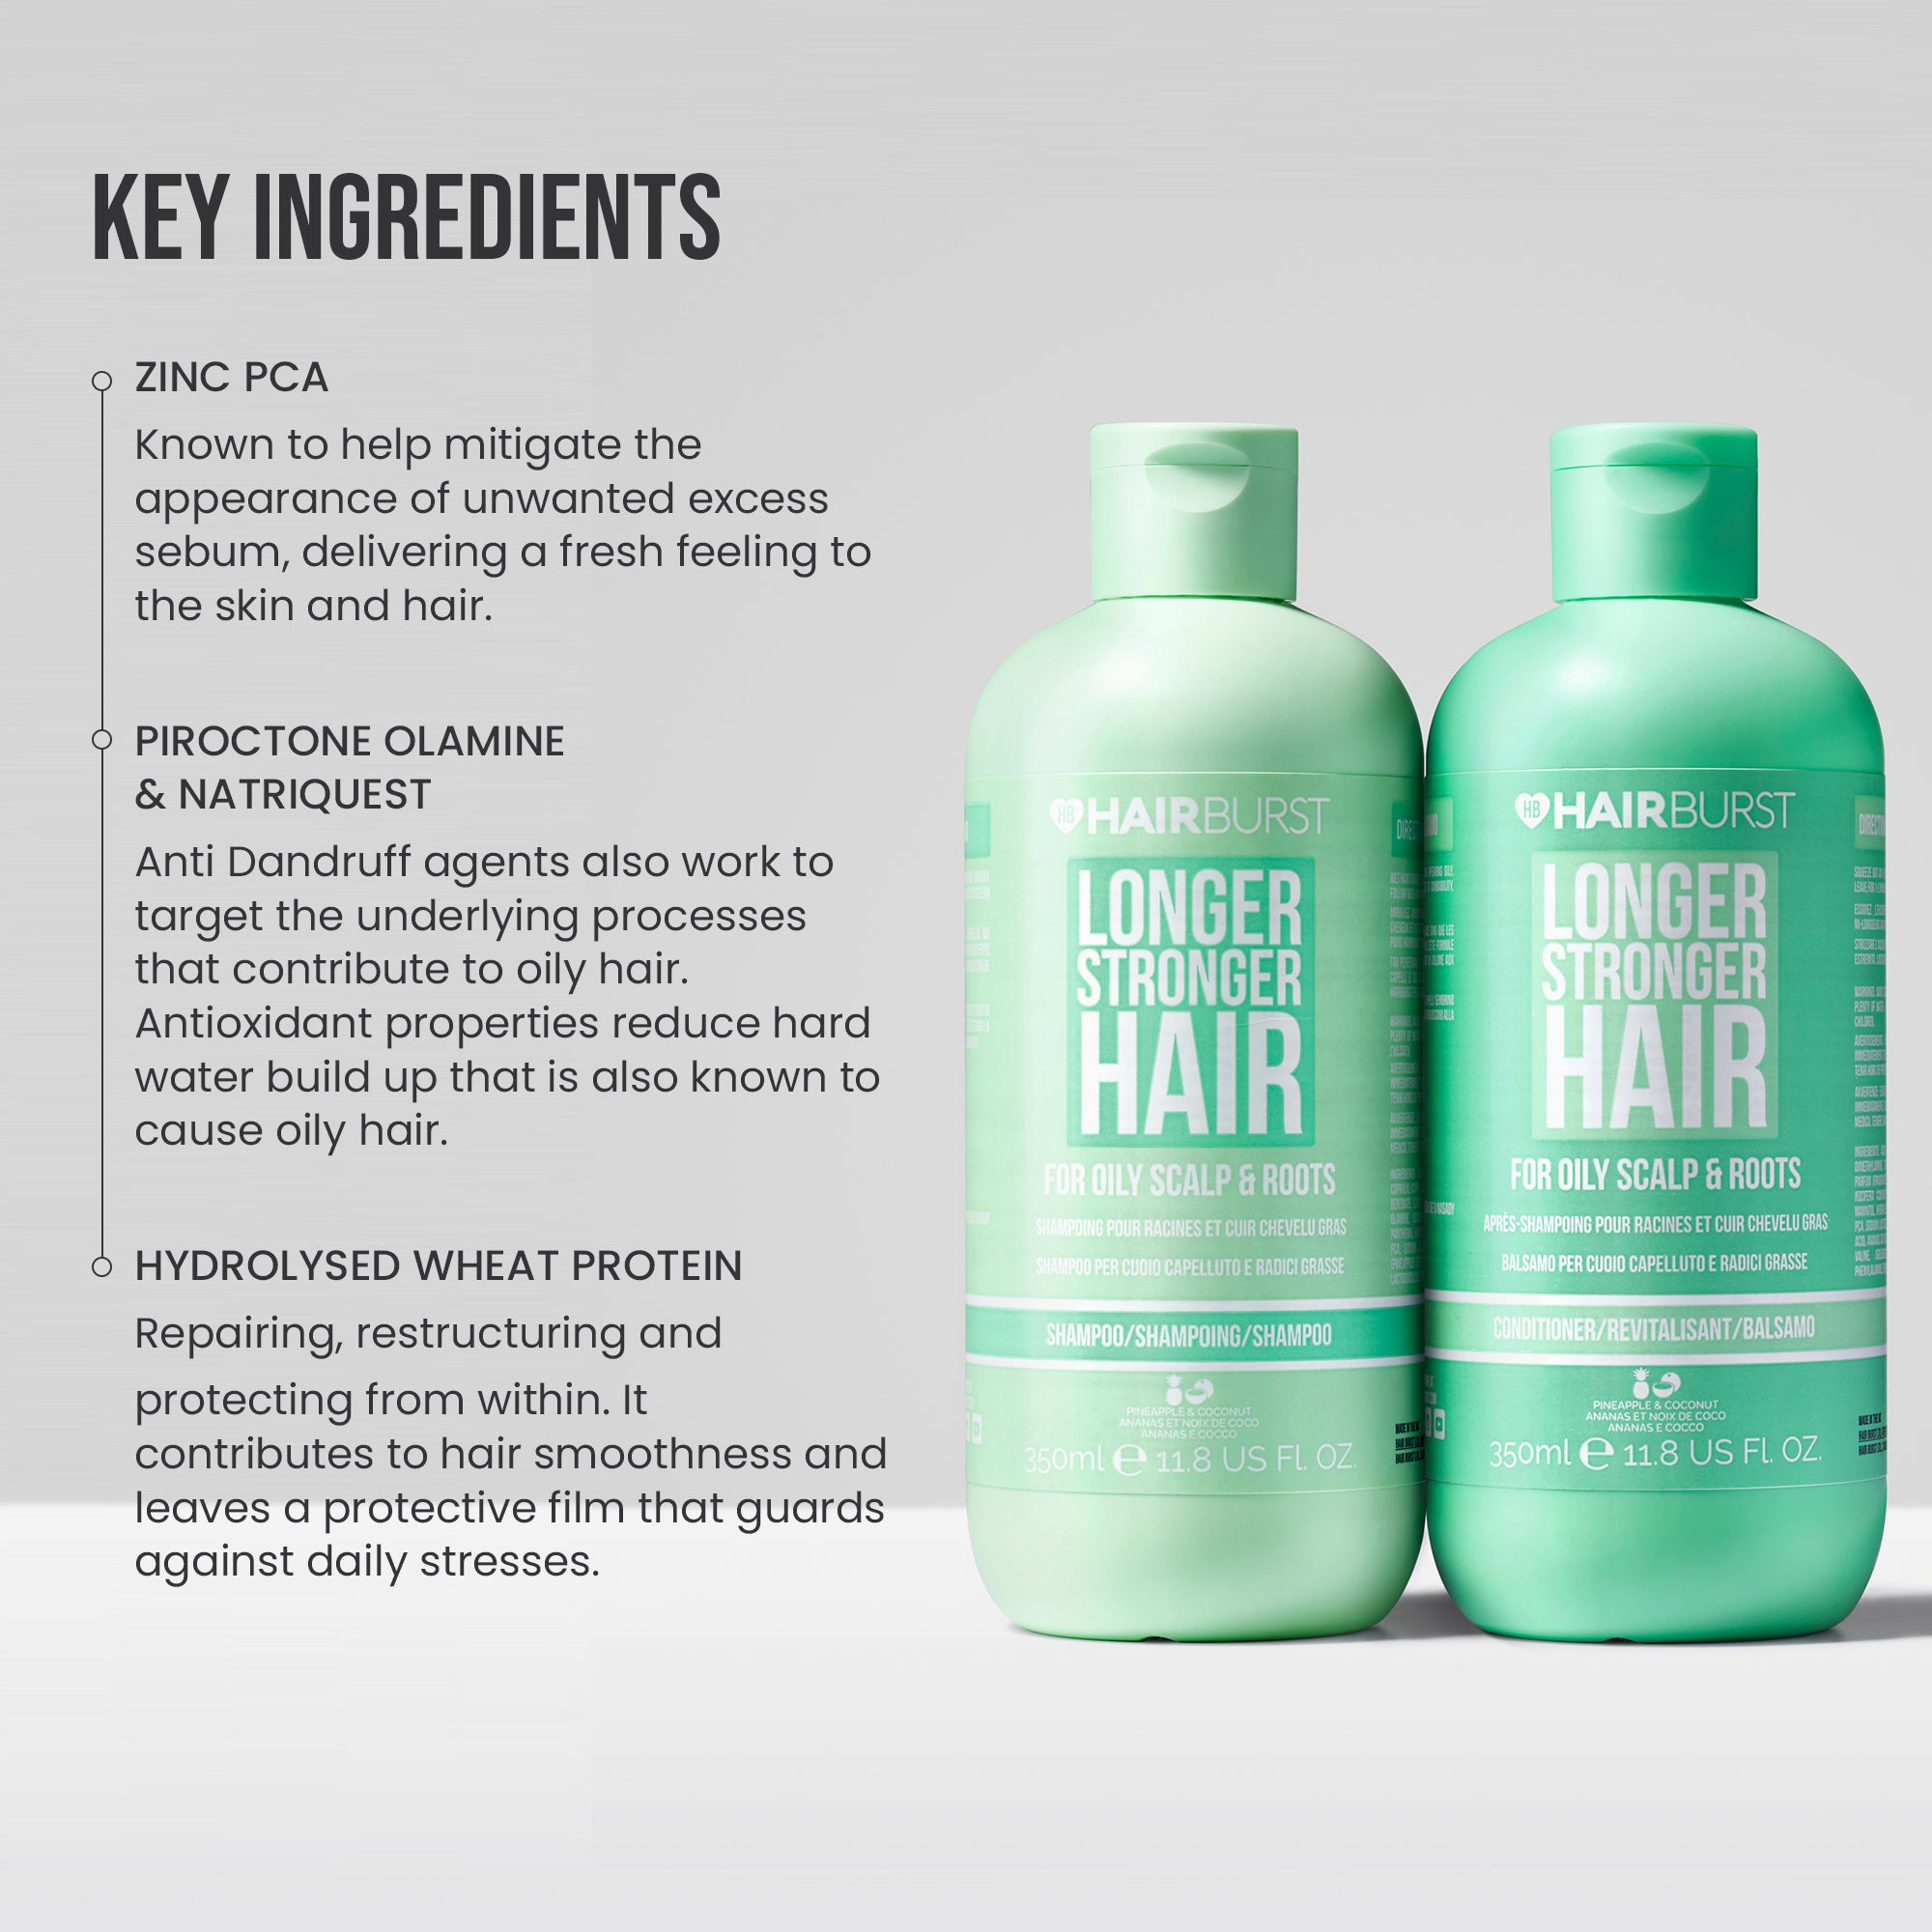 Shampoo & Conditioner for Oily Scalp and Roots